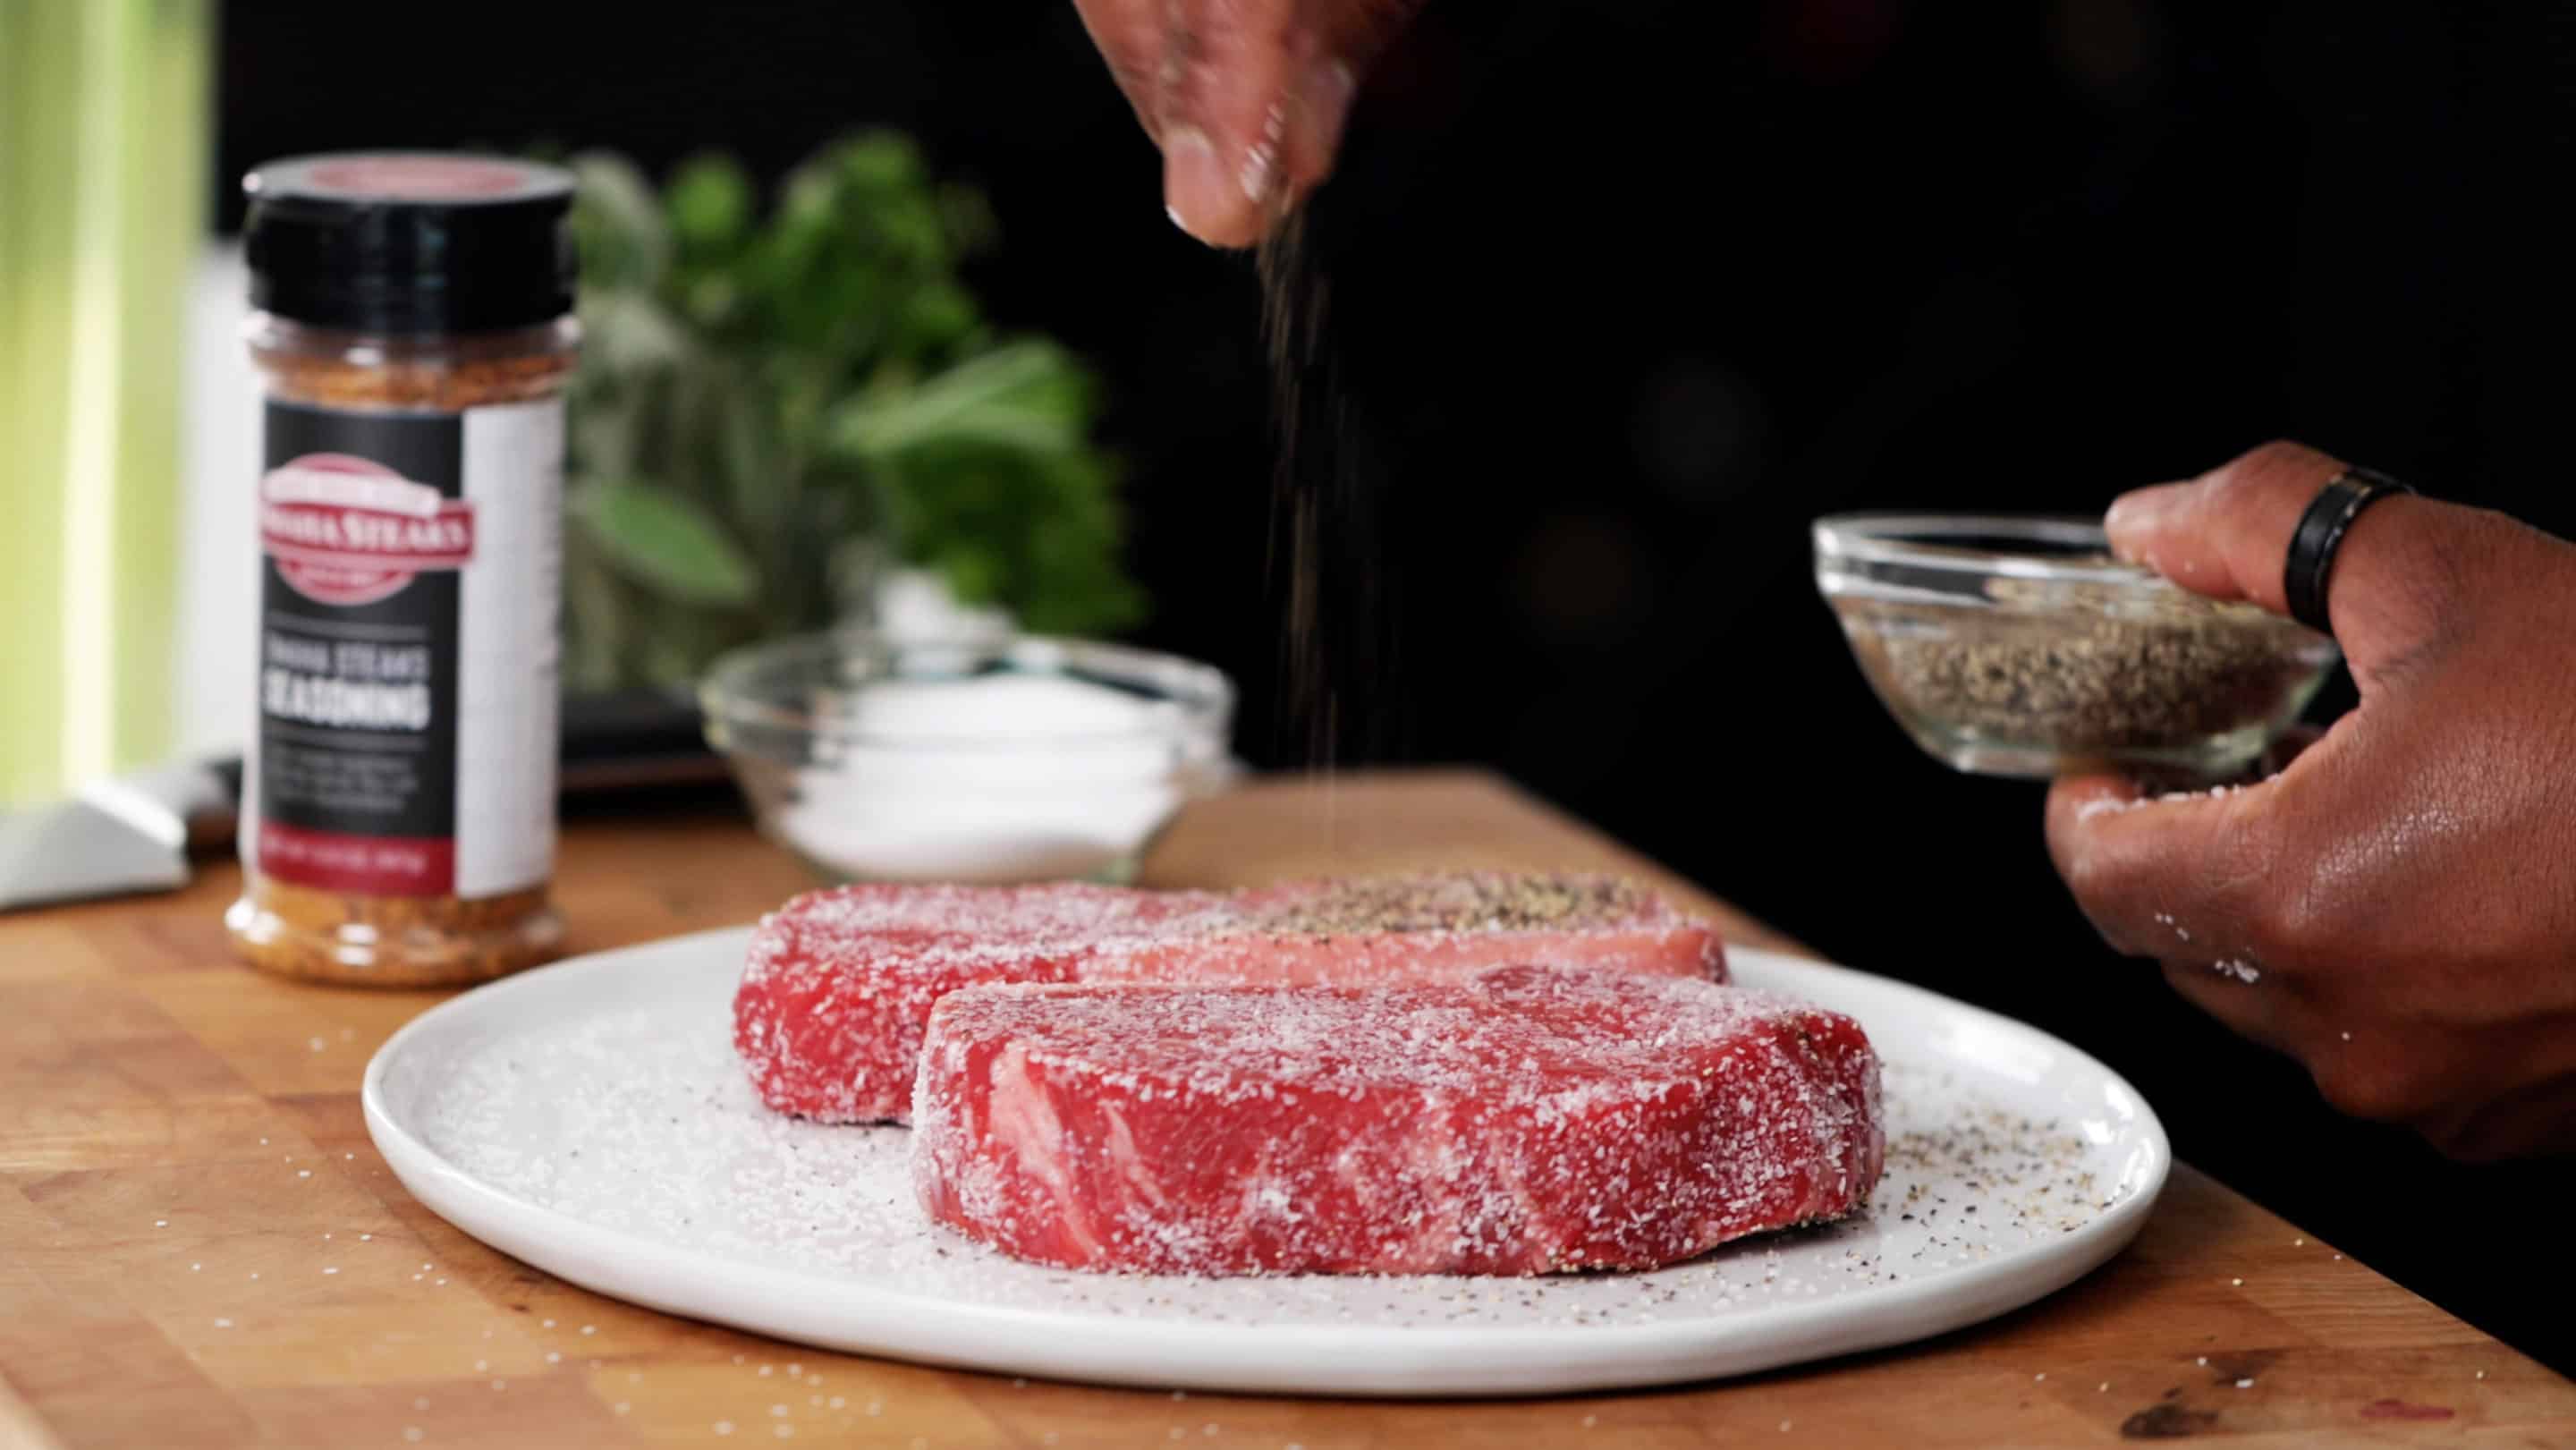 Steak Seasoning Is the Difference Between Steak That's “Meh” and